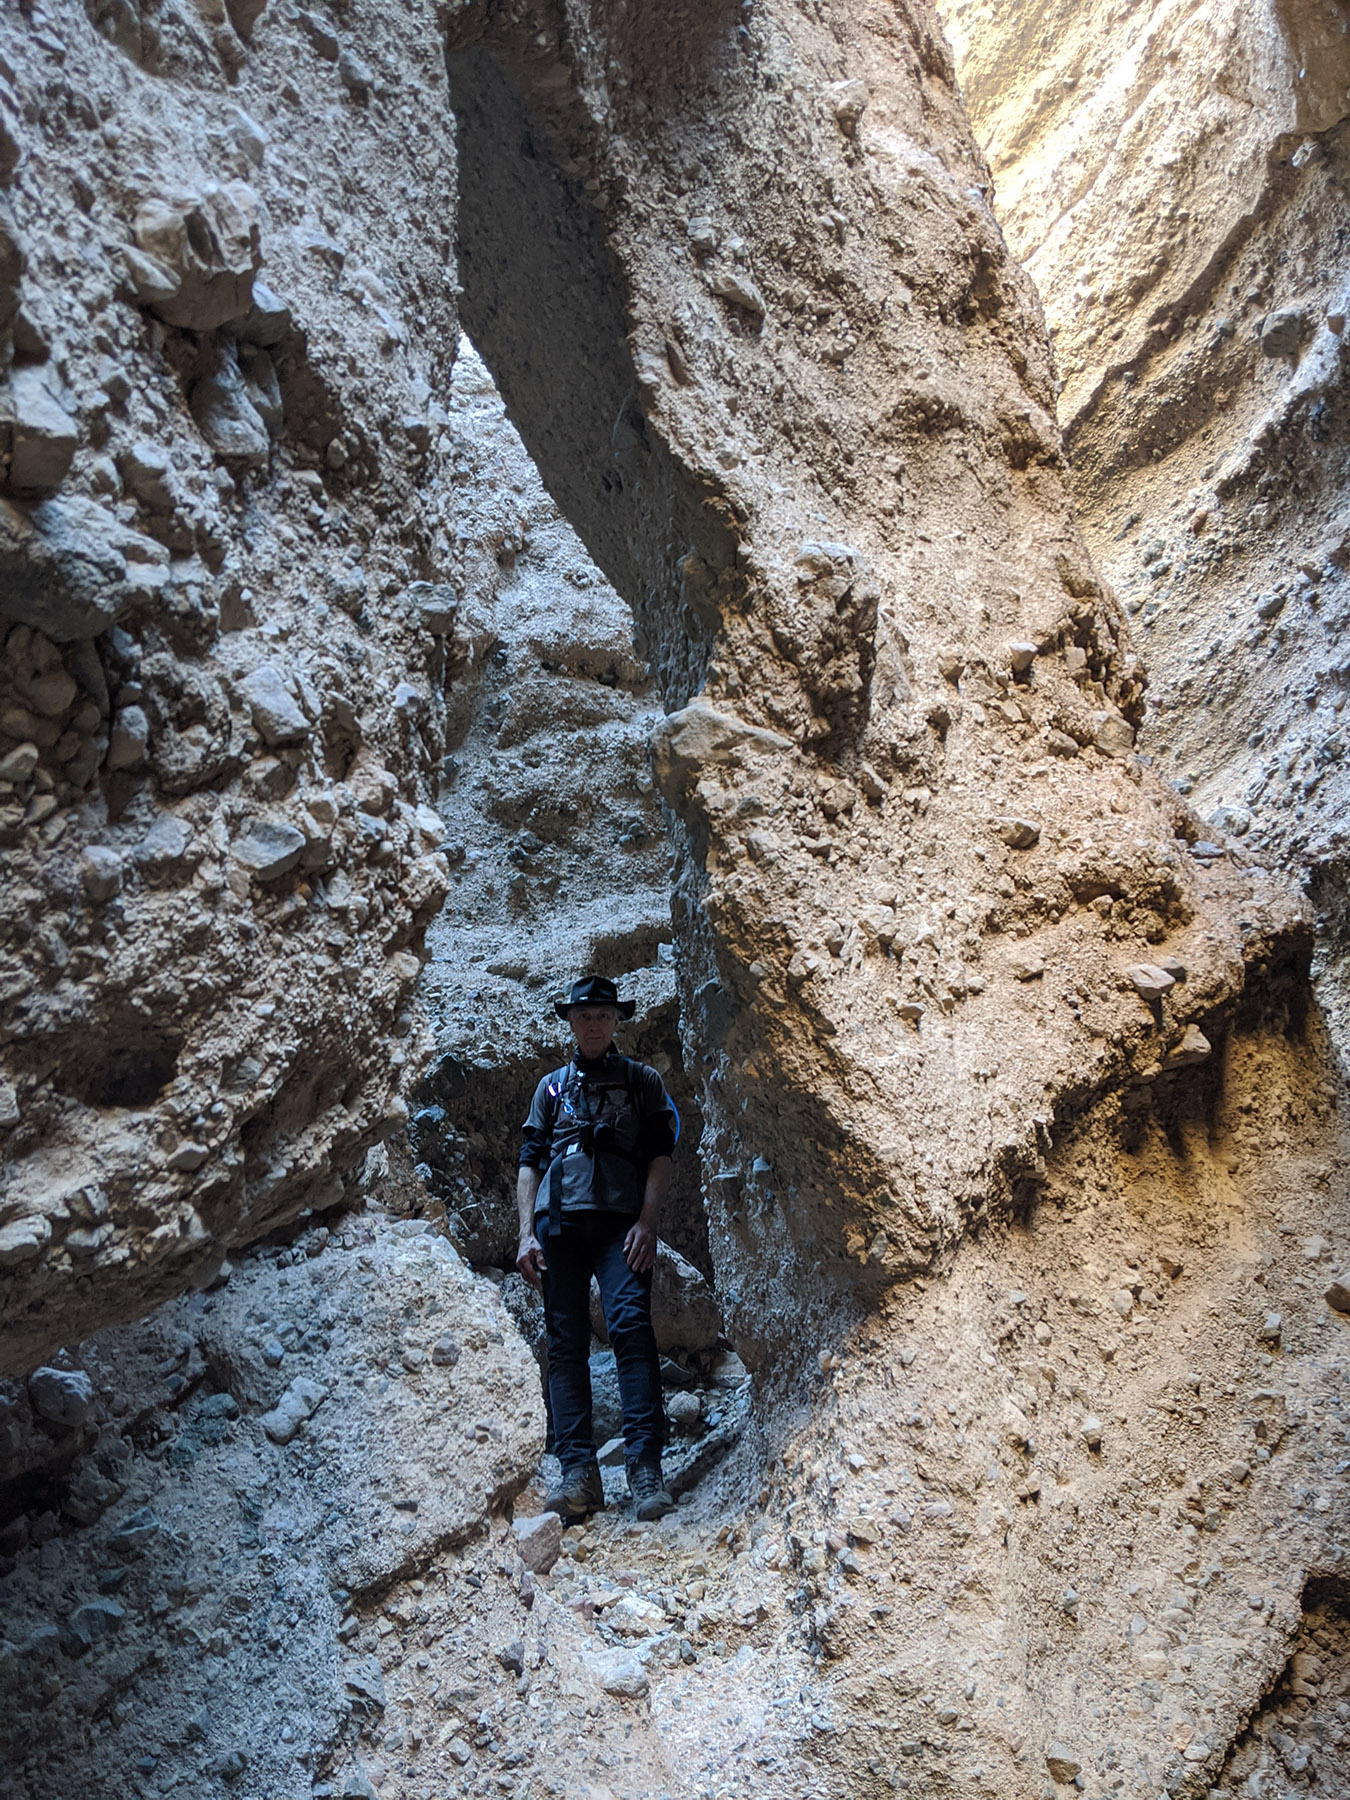 Eric in the slot canyon